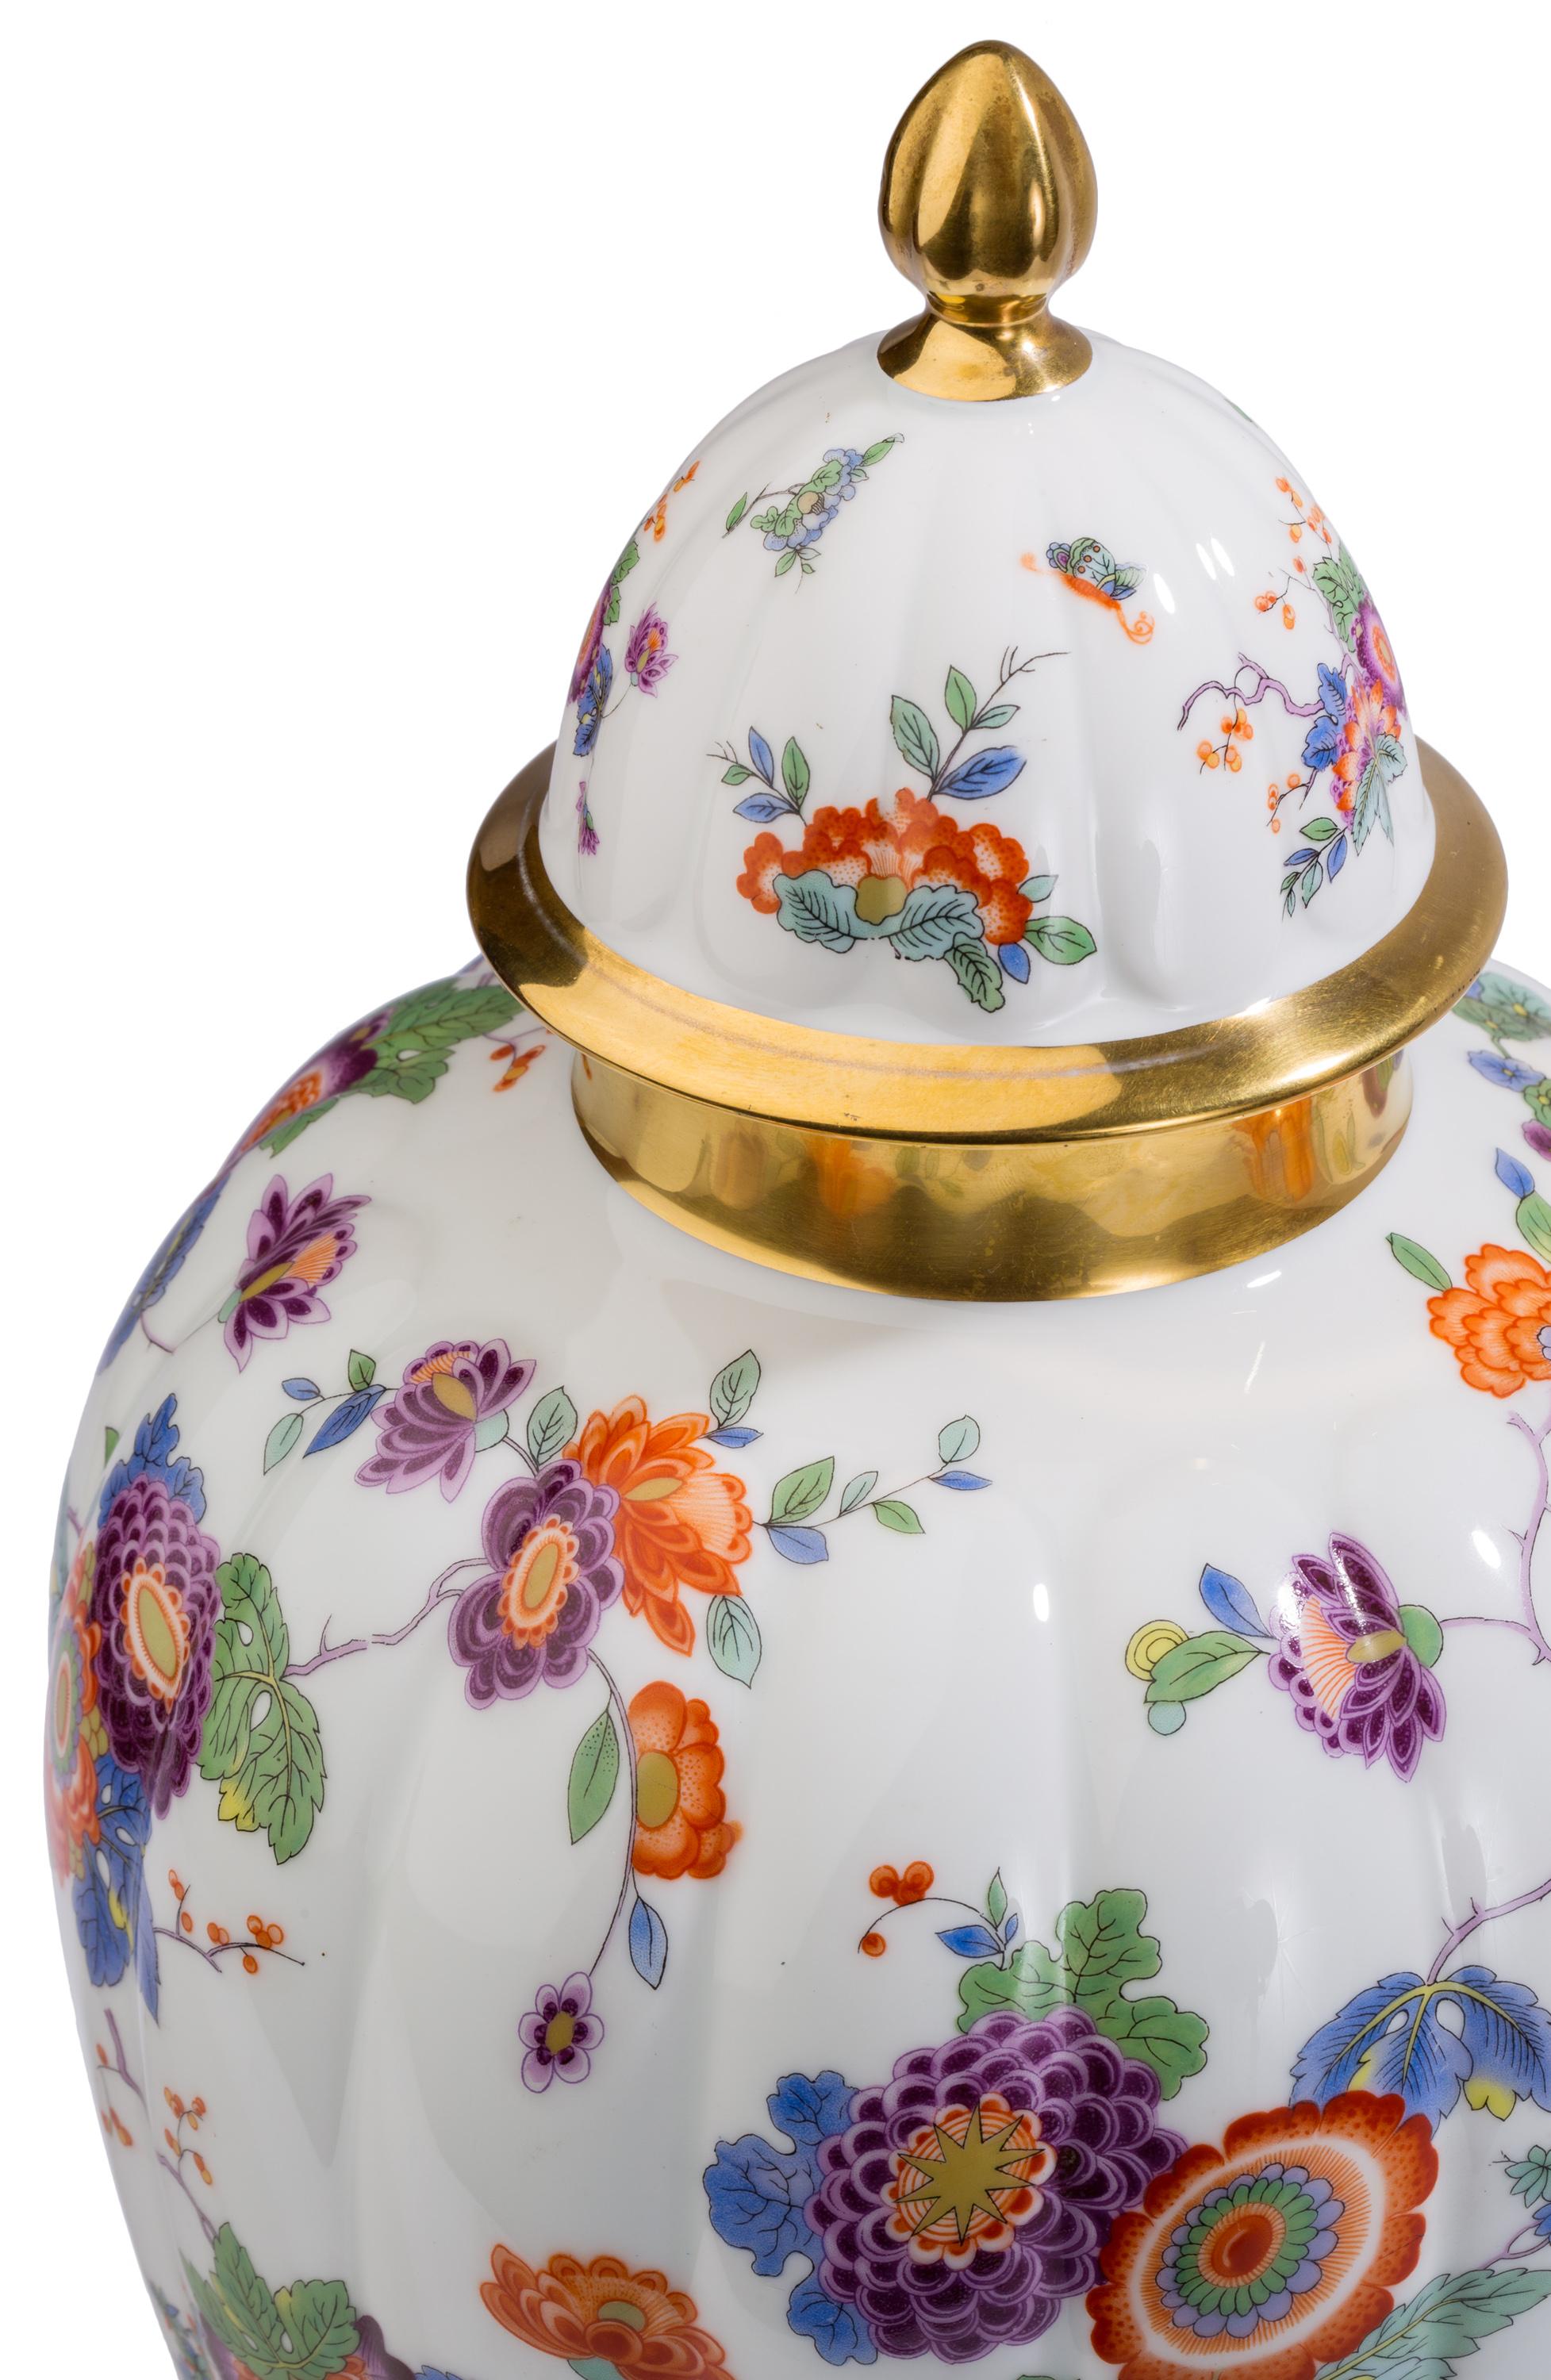 Colorfully decorated with Asian style flowers and storks and with gilt detailing, this lidded porcelain jar / vase / urn was made by Thomas of Bavaria. According to the style of mark on the bottom of the piece, it was manufactured in 1931.